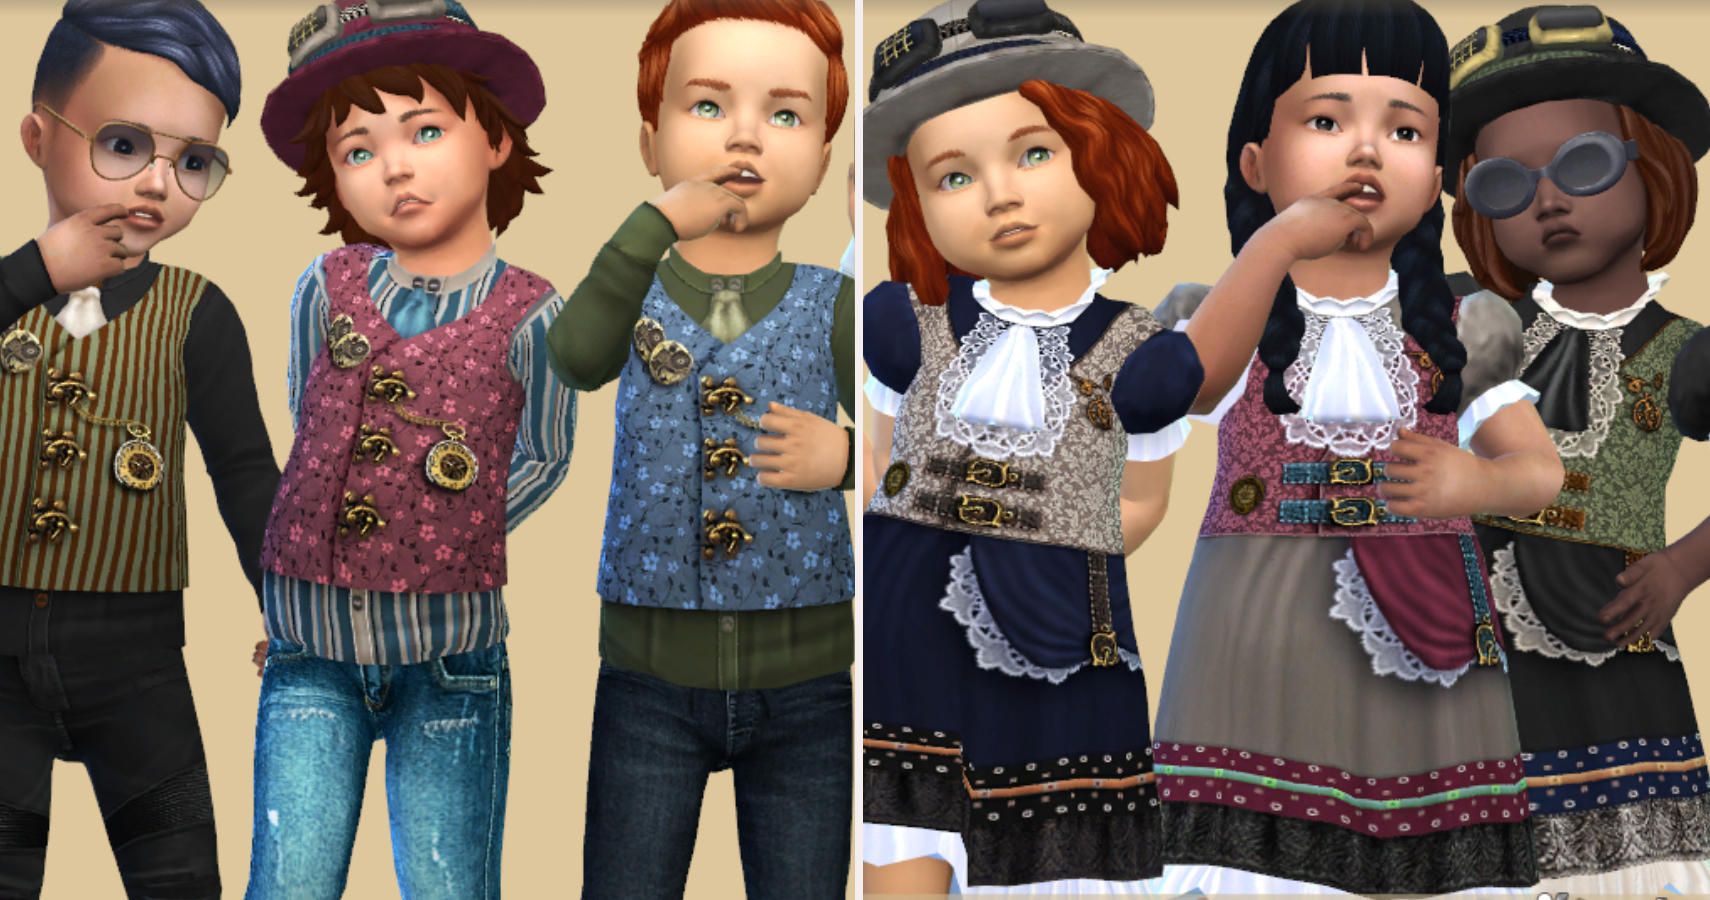 left side 3 sims boys in steampunk style waistcoats and jeans. Right side 3 toddler girls in steampunk dresses and hats.